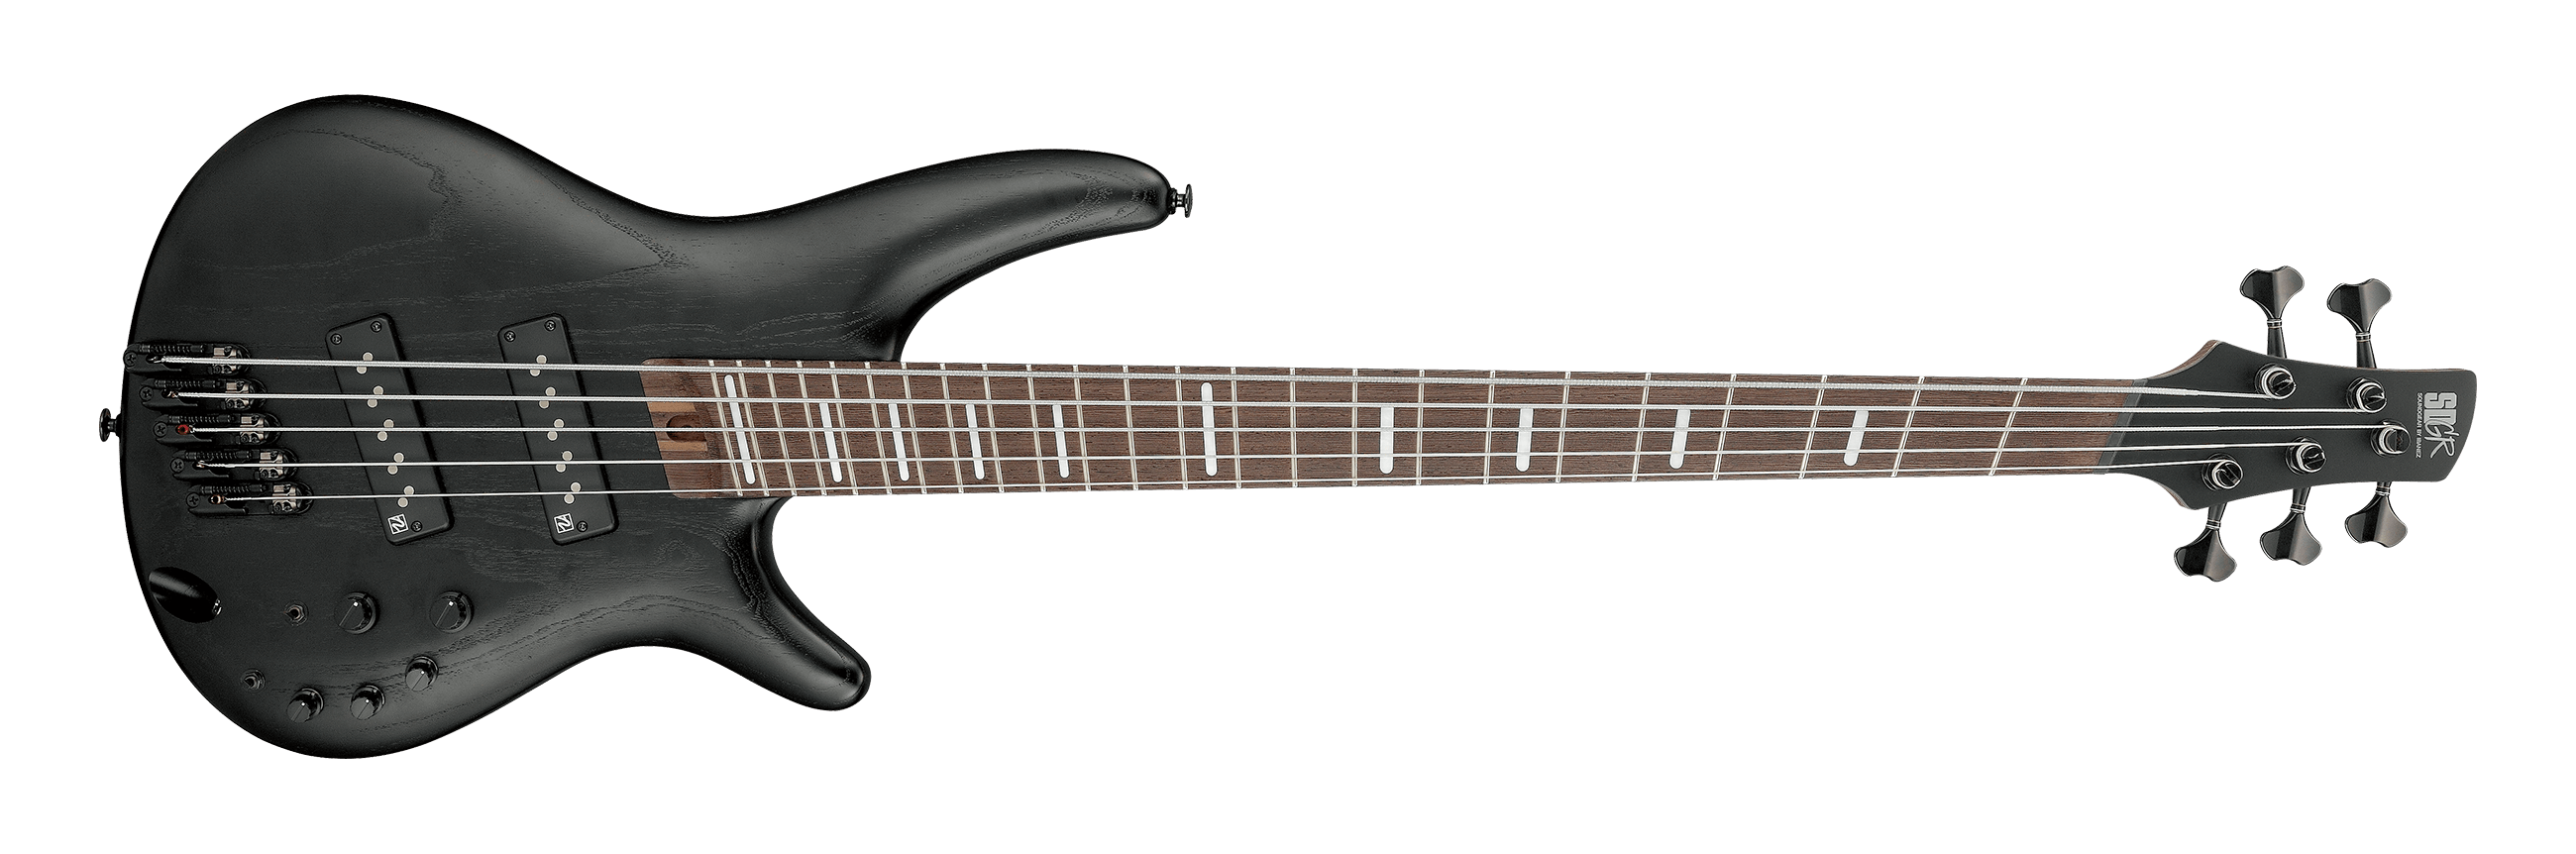 SRMS5 | SR | ELECTRIC BASSES | PRODUCTS | Ibanez guitars 